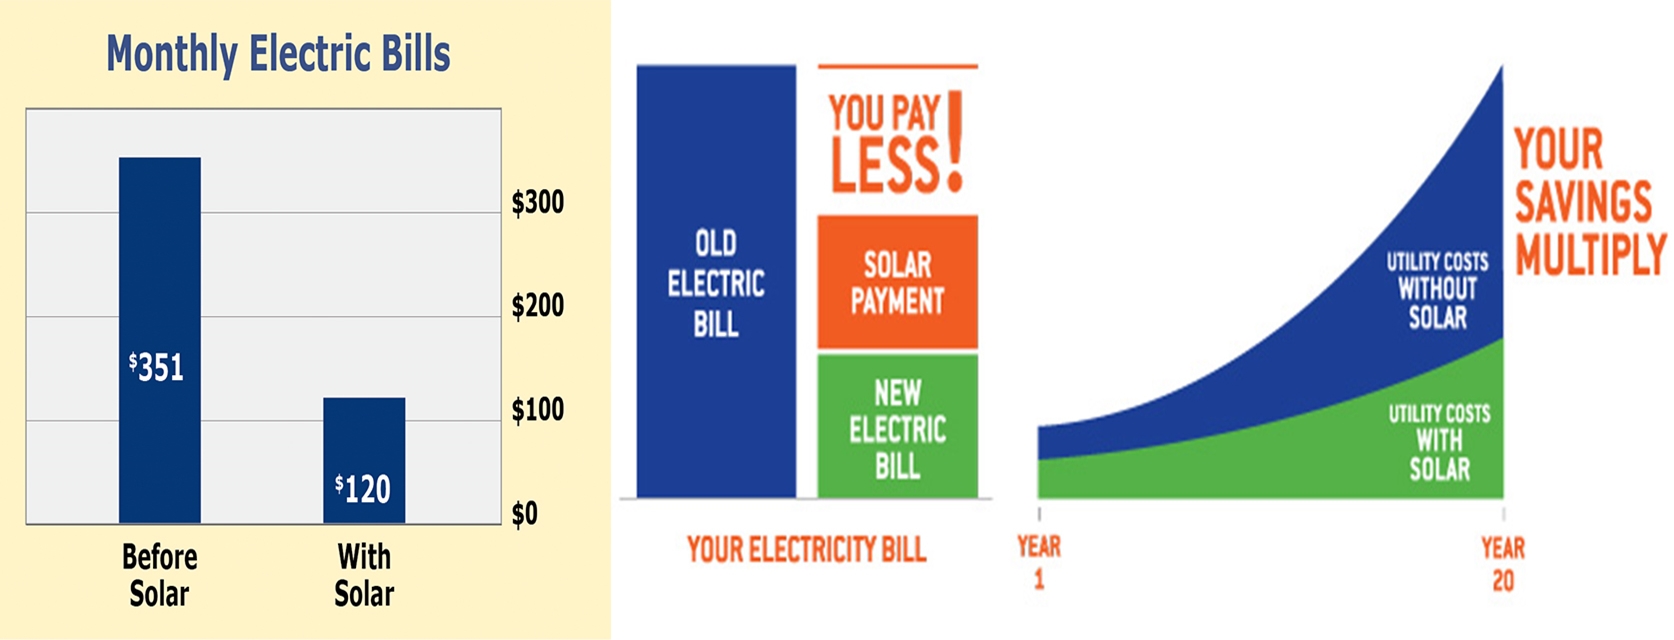 Reduction in your electric bills